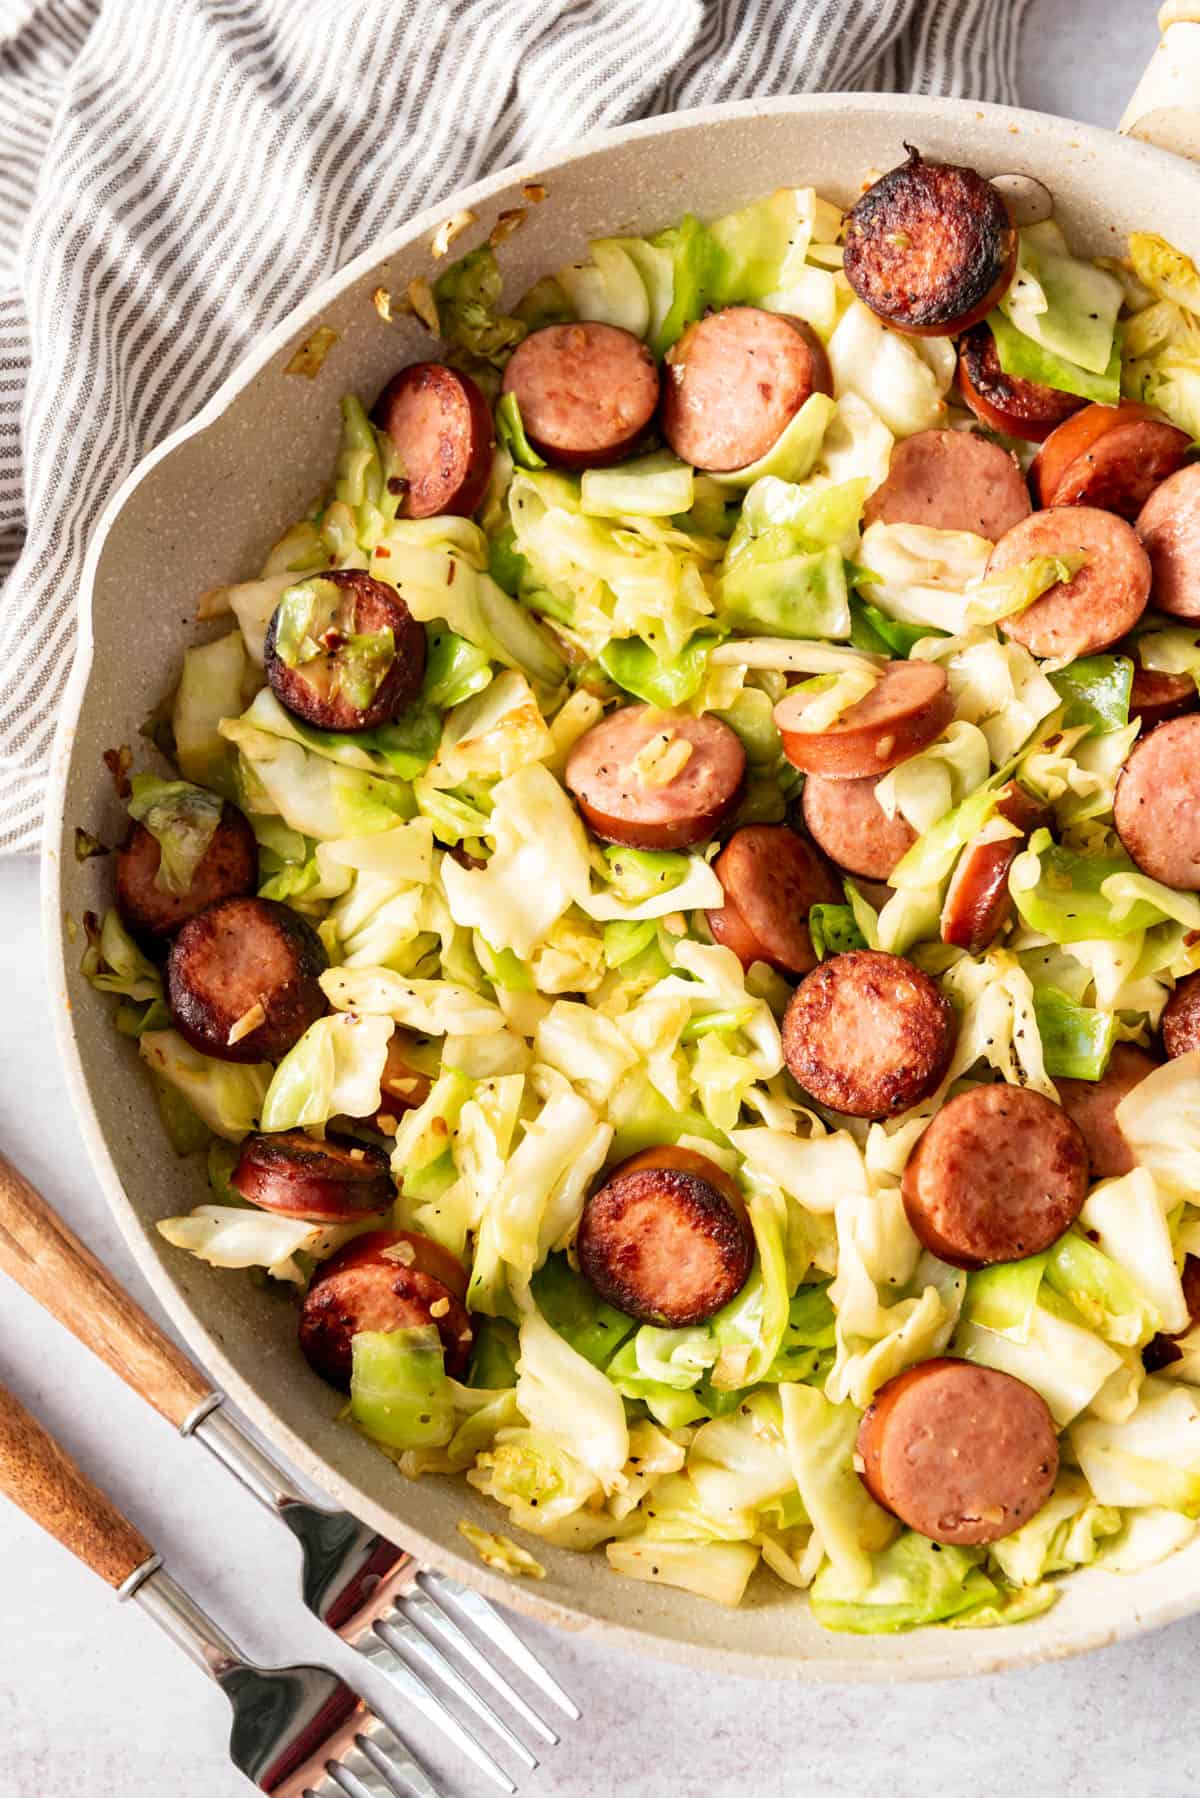 Sauteed cabbage and kielbasa sausage in a pan next to forks and a linen napkin.